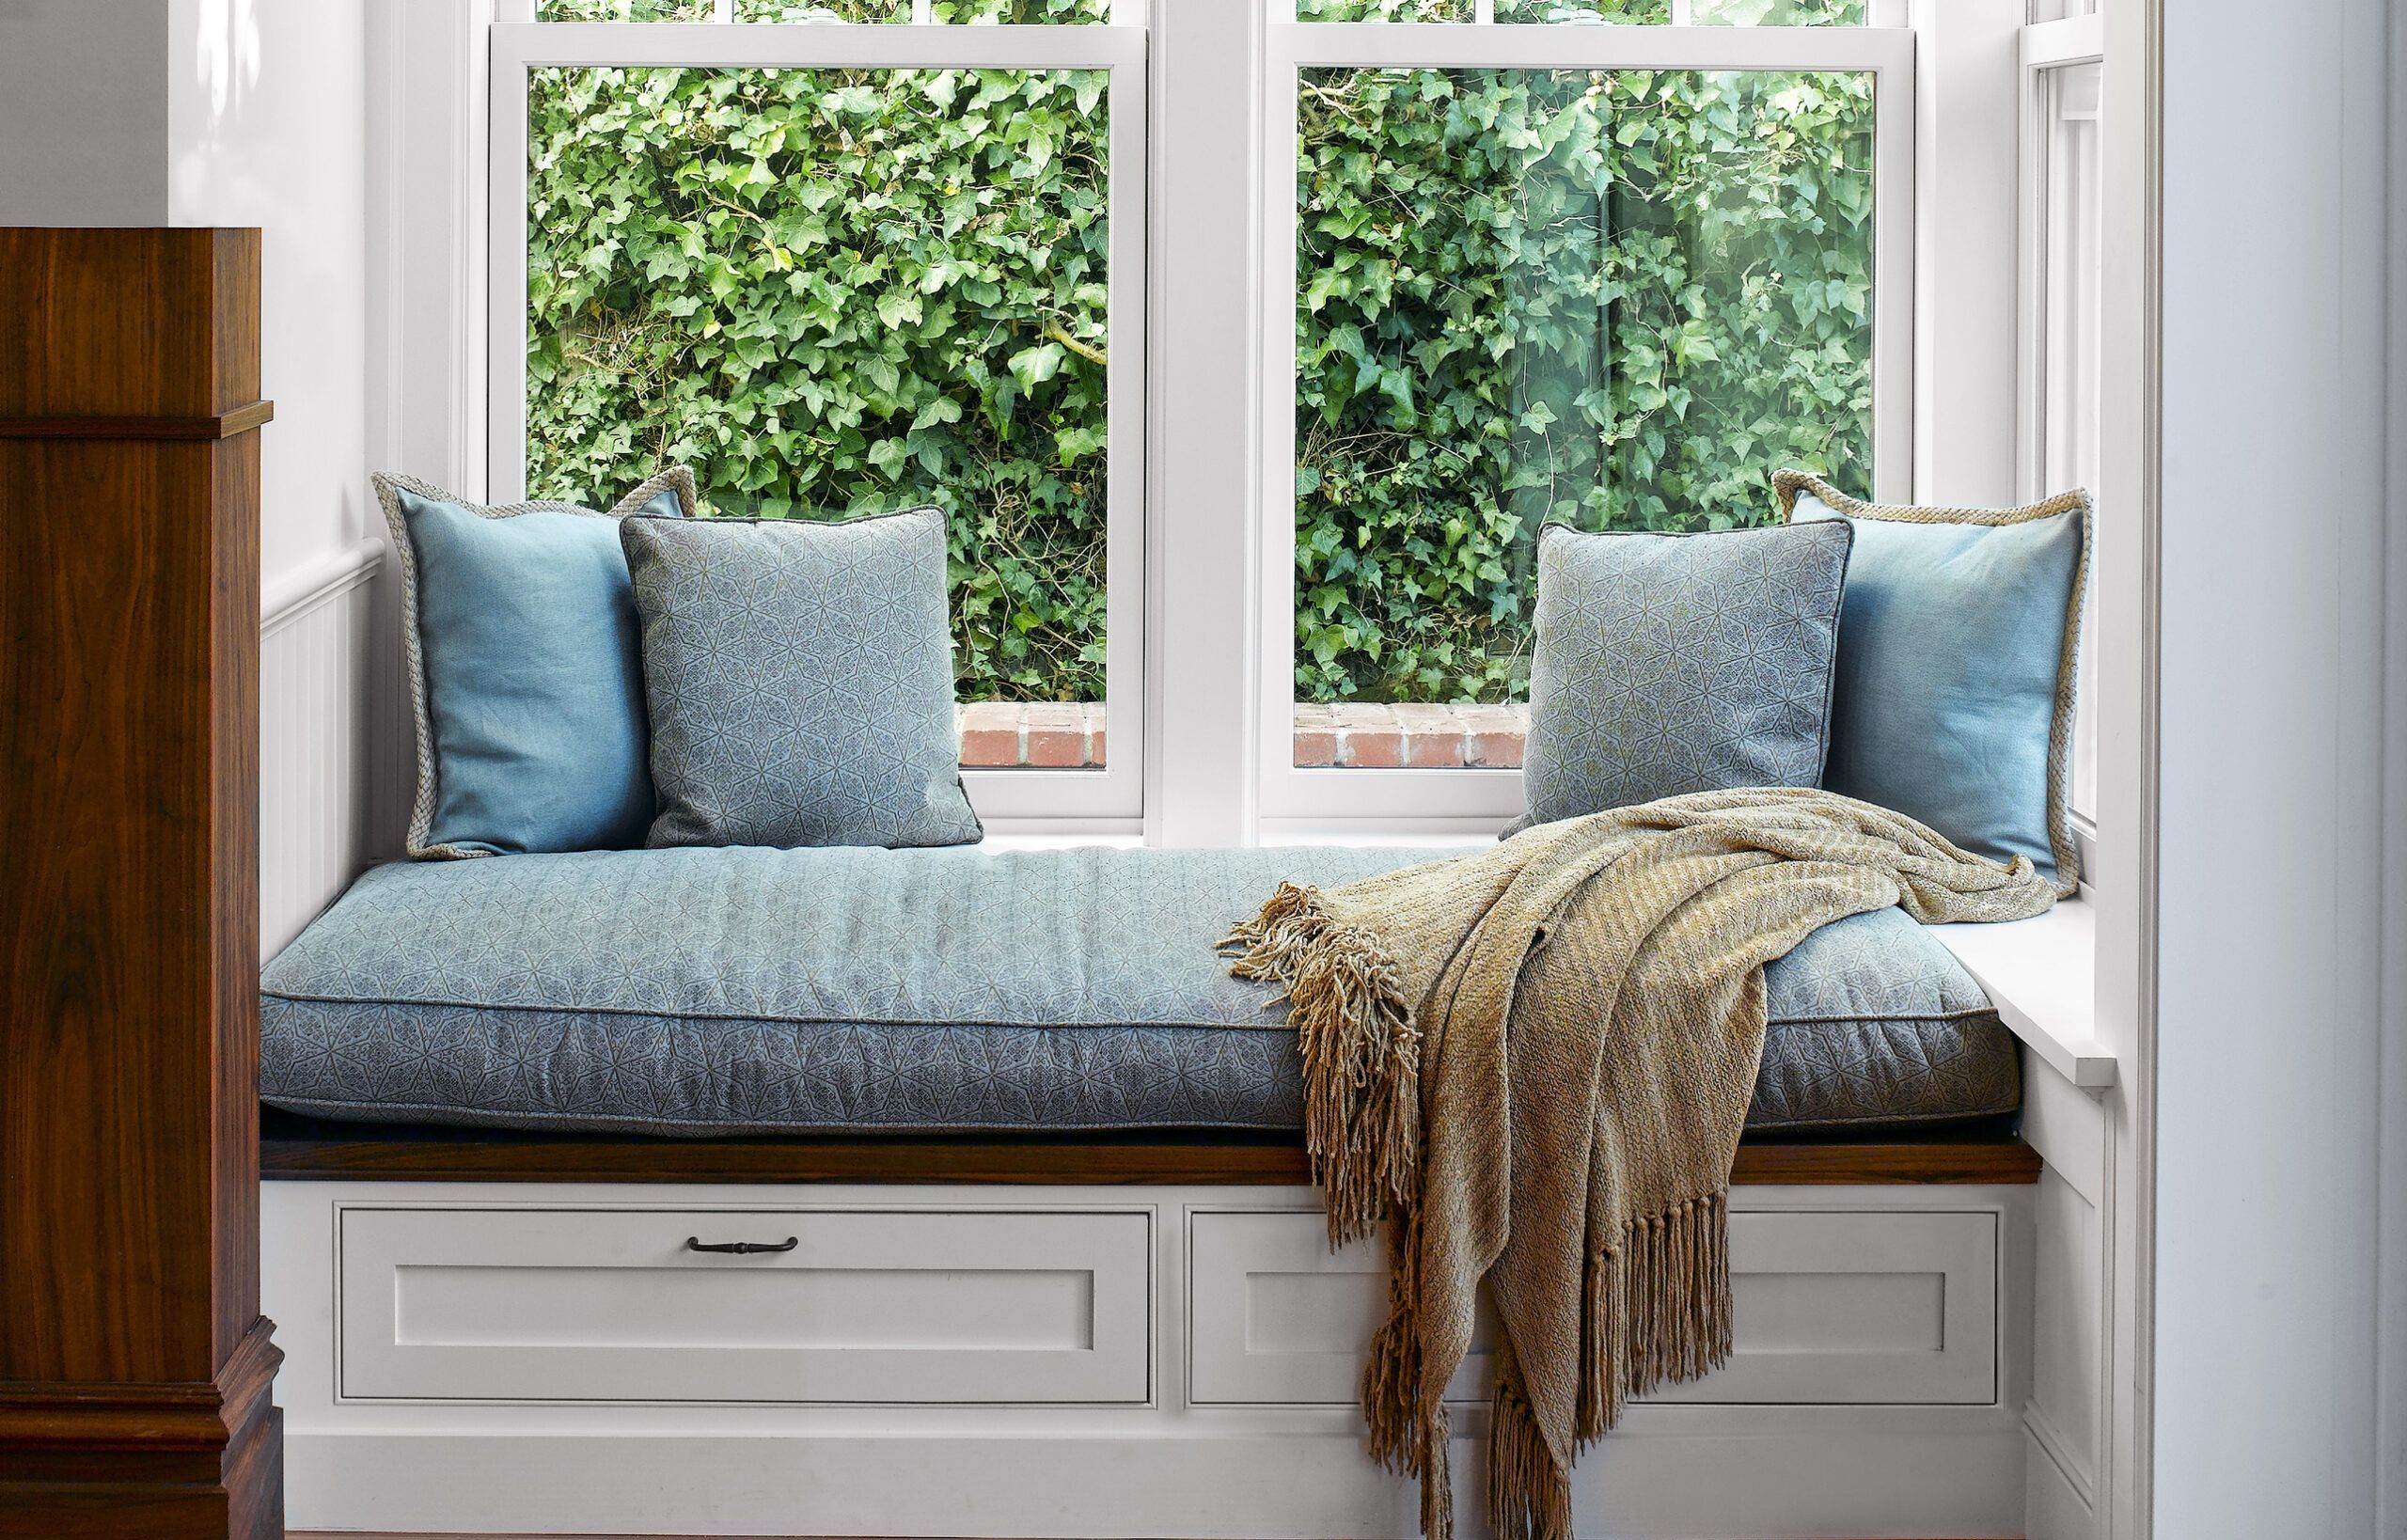 All About Window Seats - This Old House